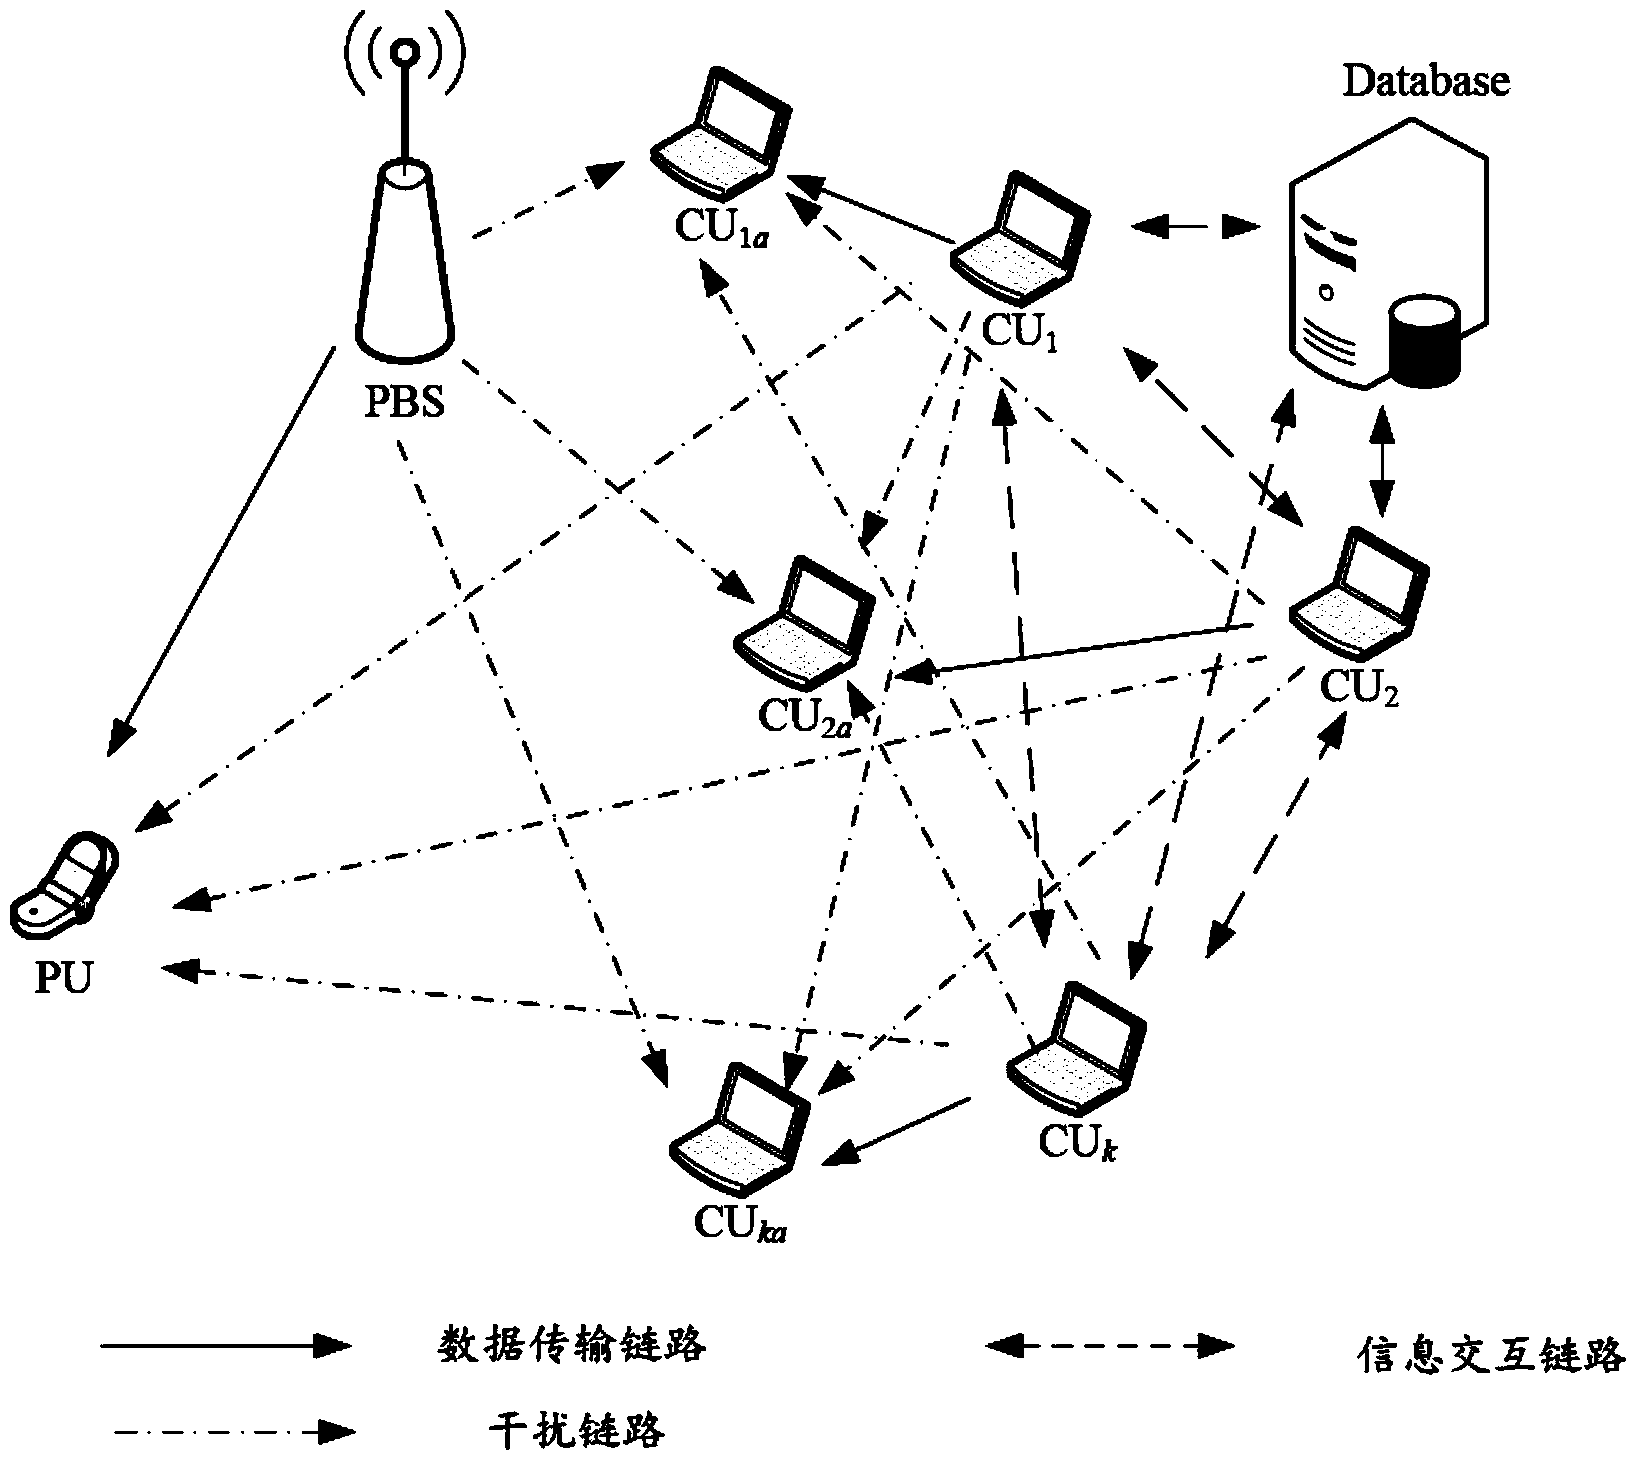 Cognitive radio user space division multiplexing method based on interference alignment